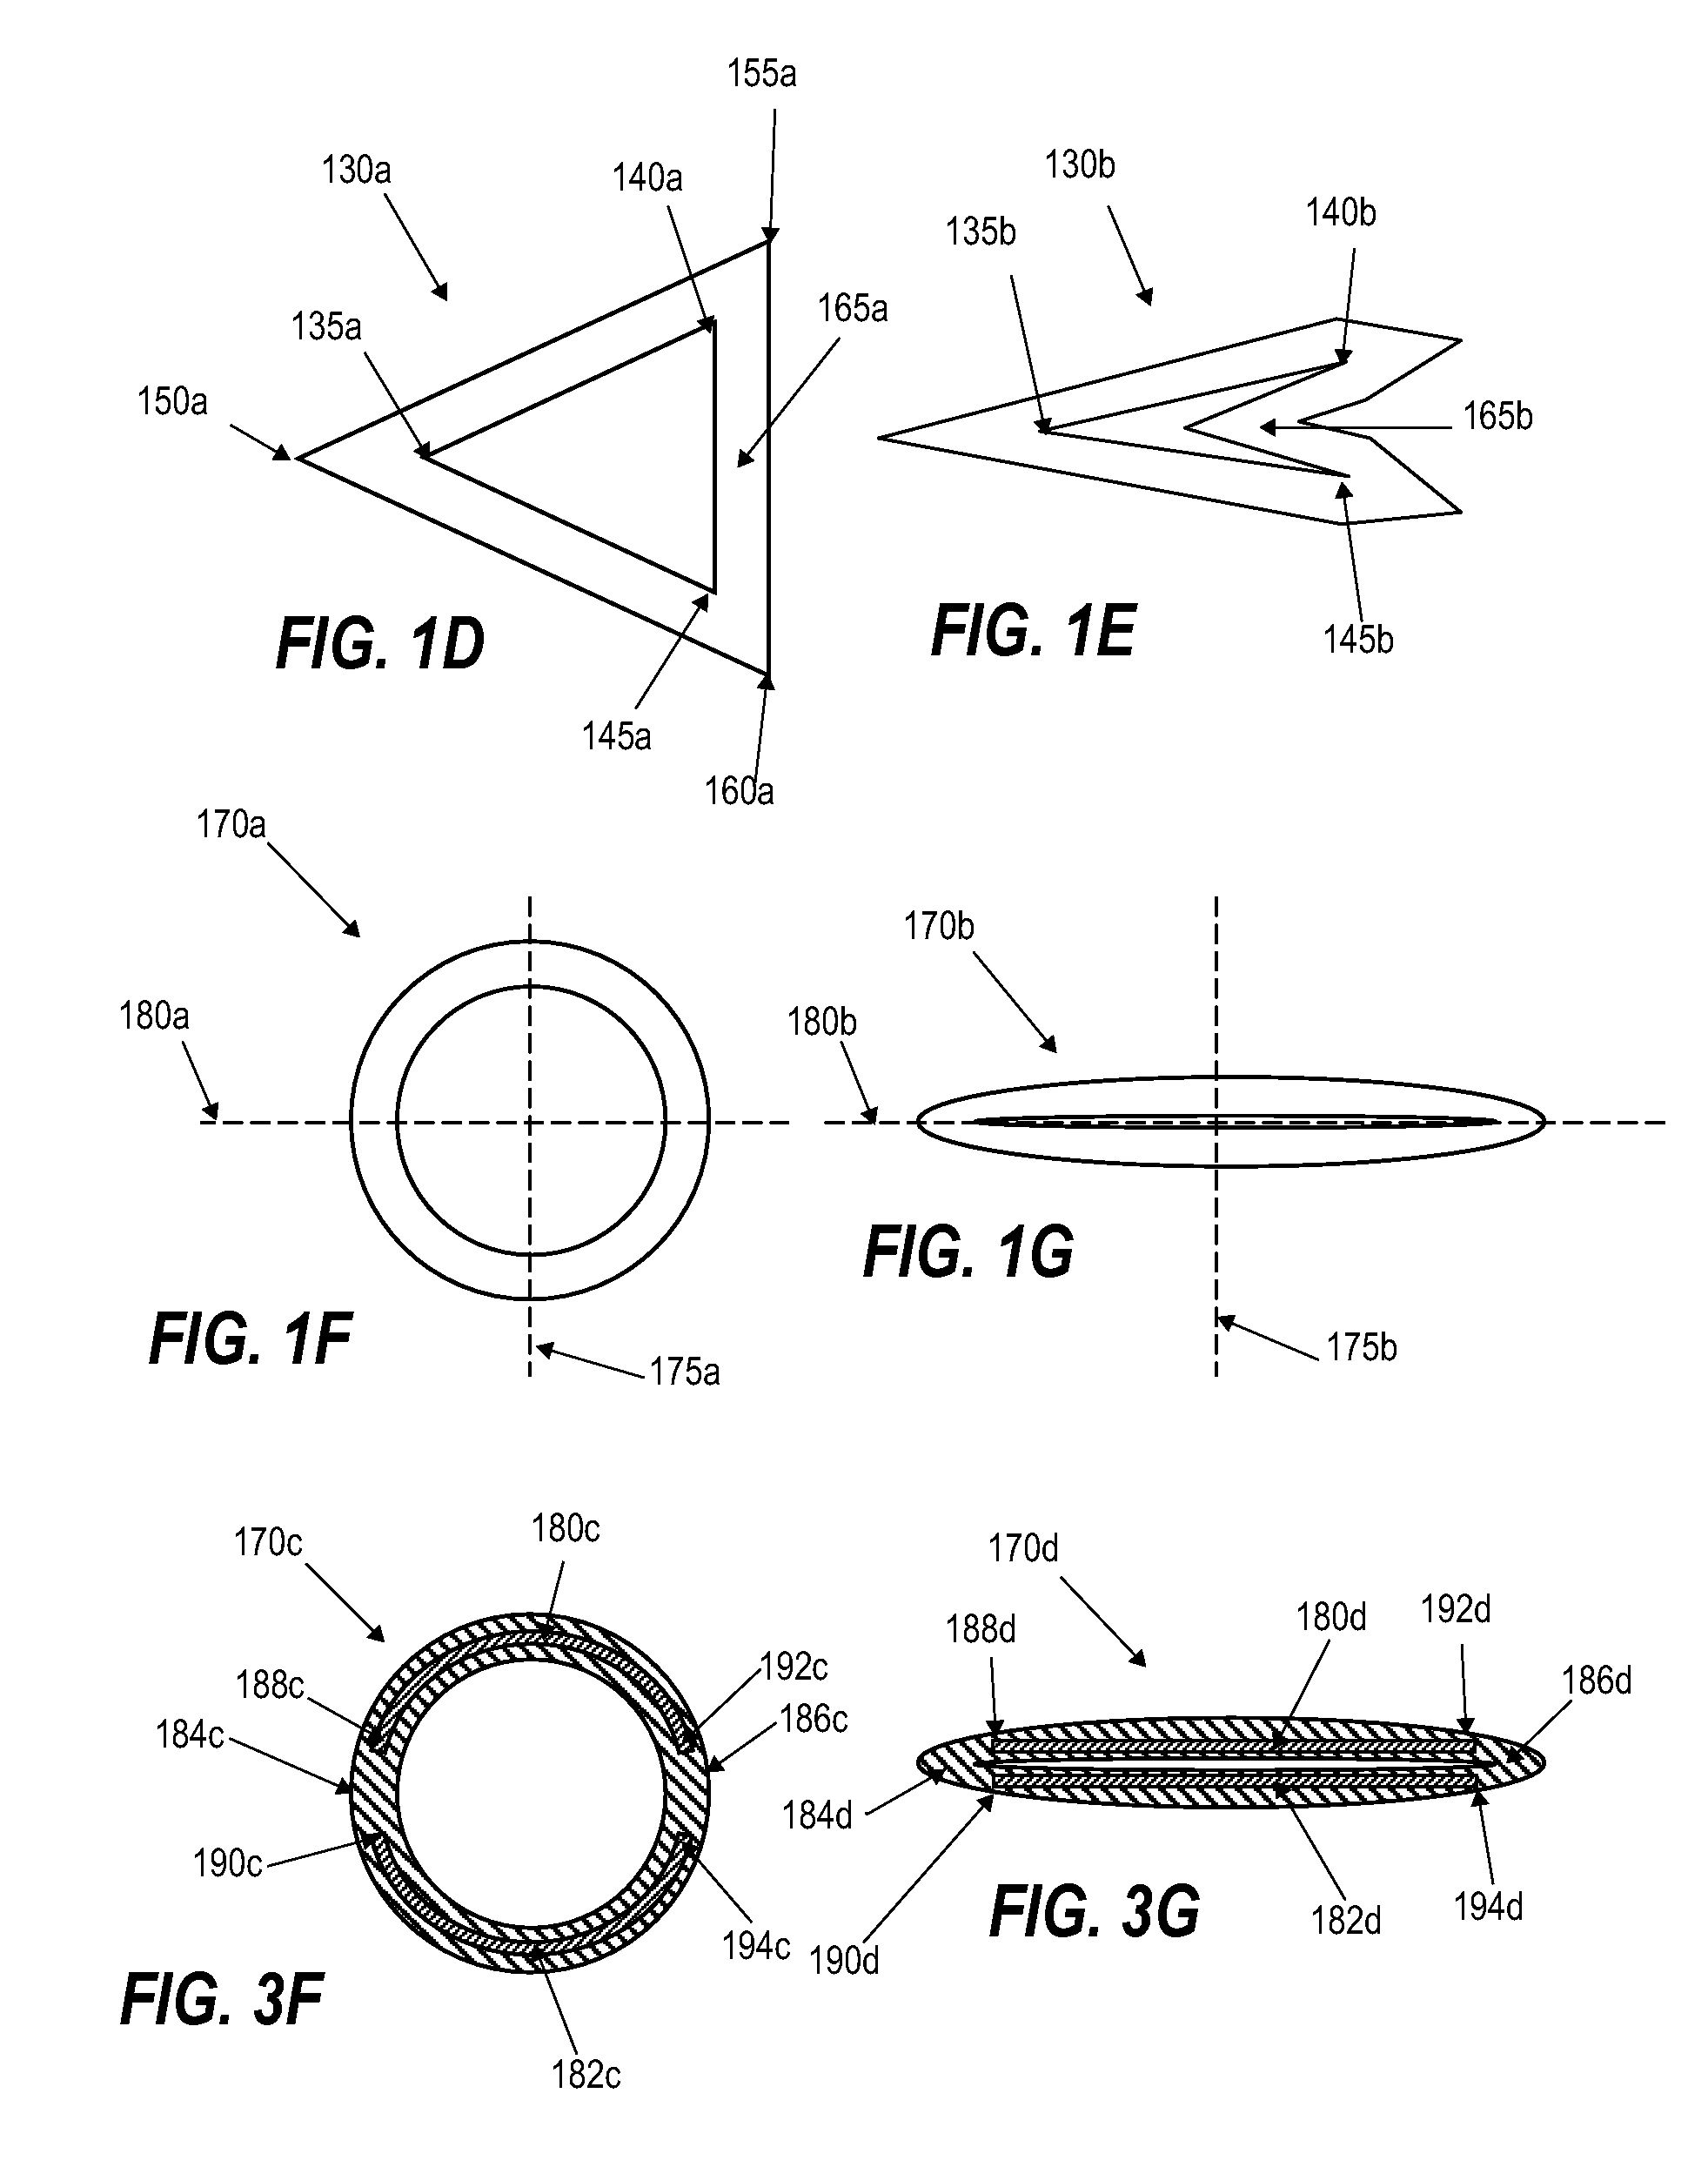 Suture-based orthopedic joint devices